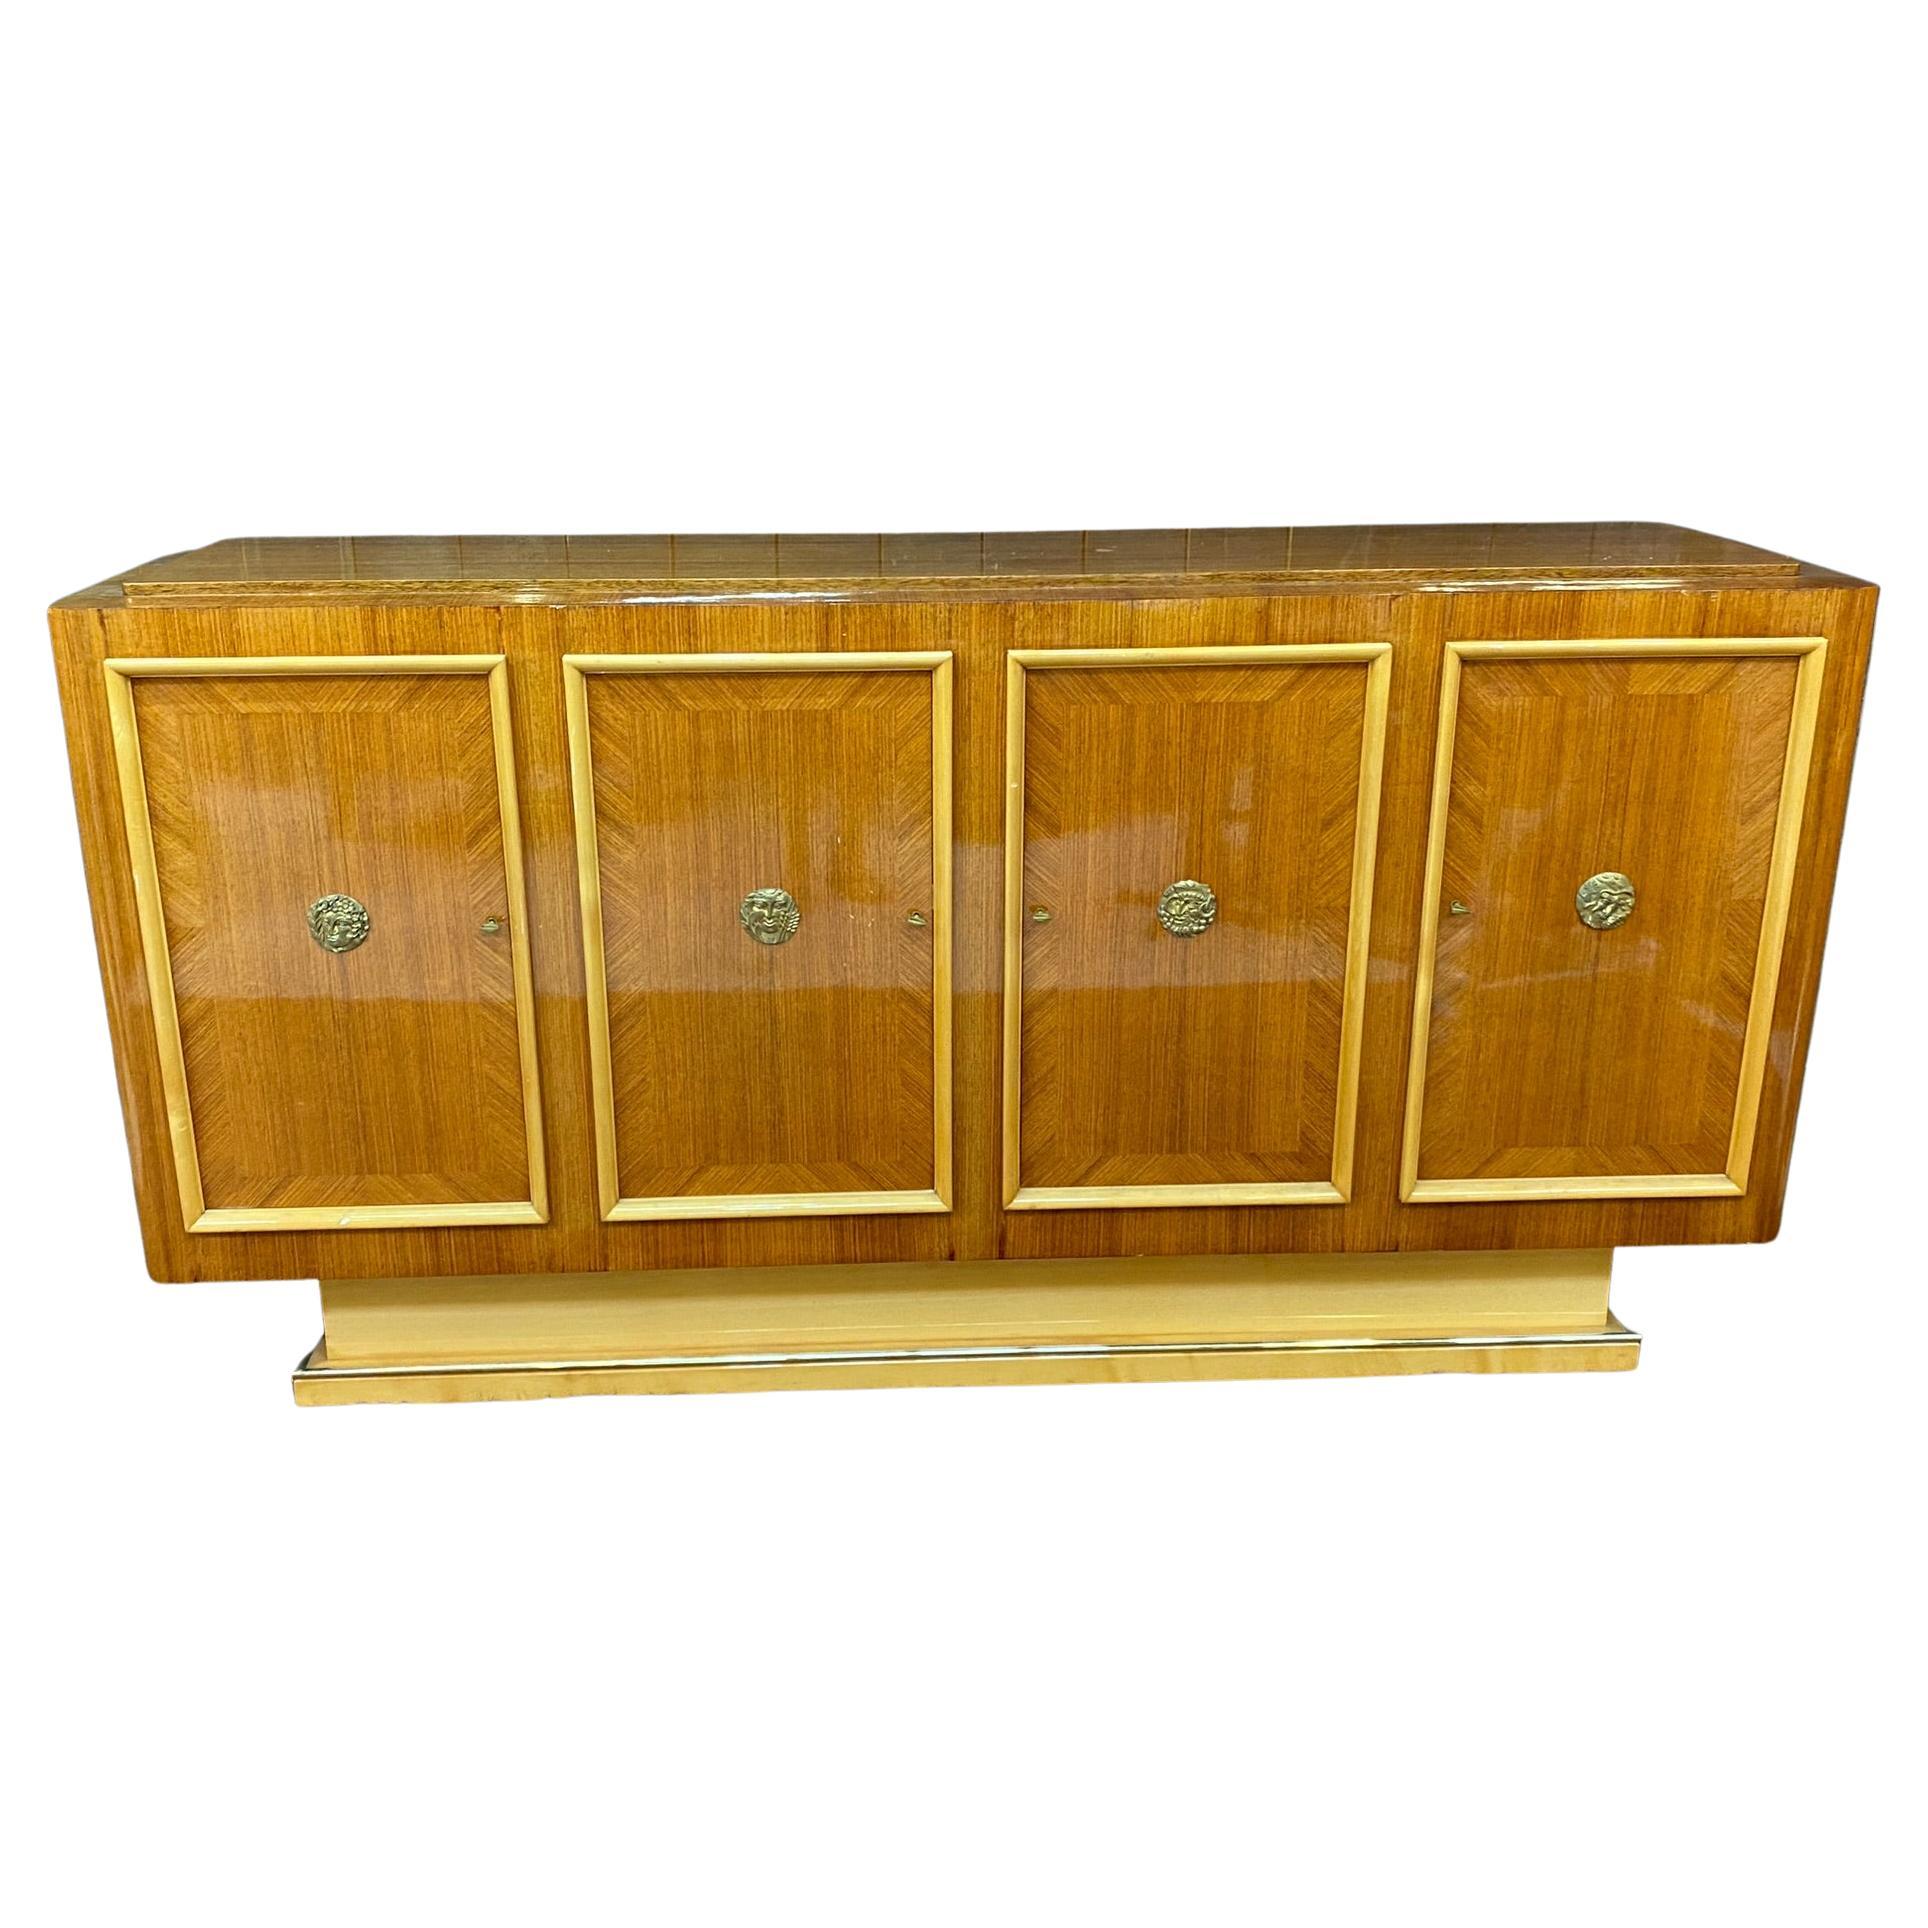  Art Deco Sideboard in Walnut and sycomore circa 1930 For Sale